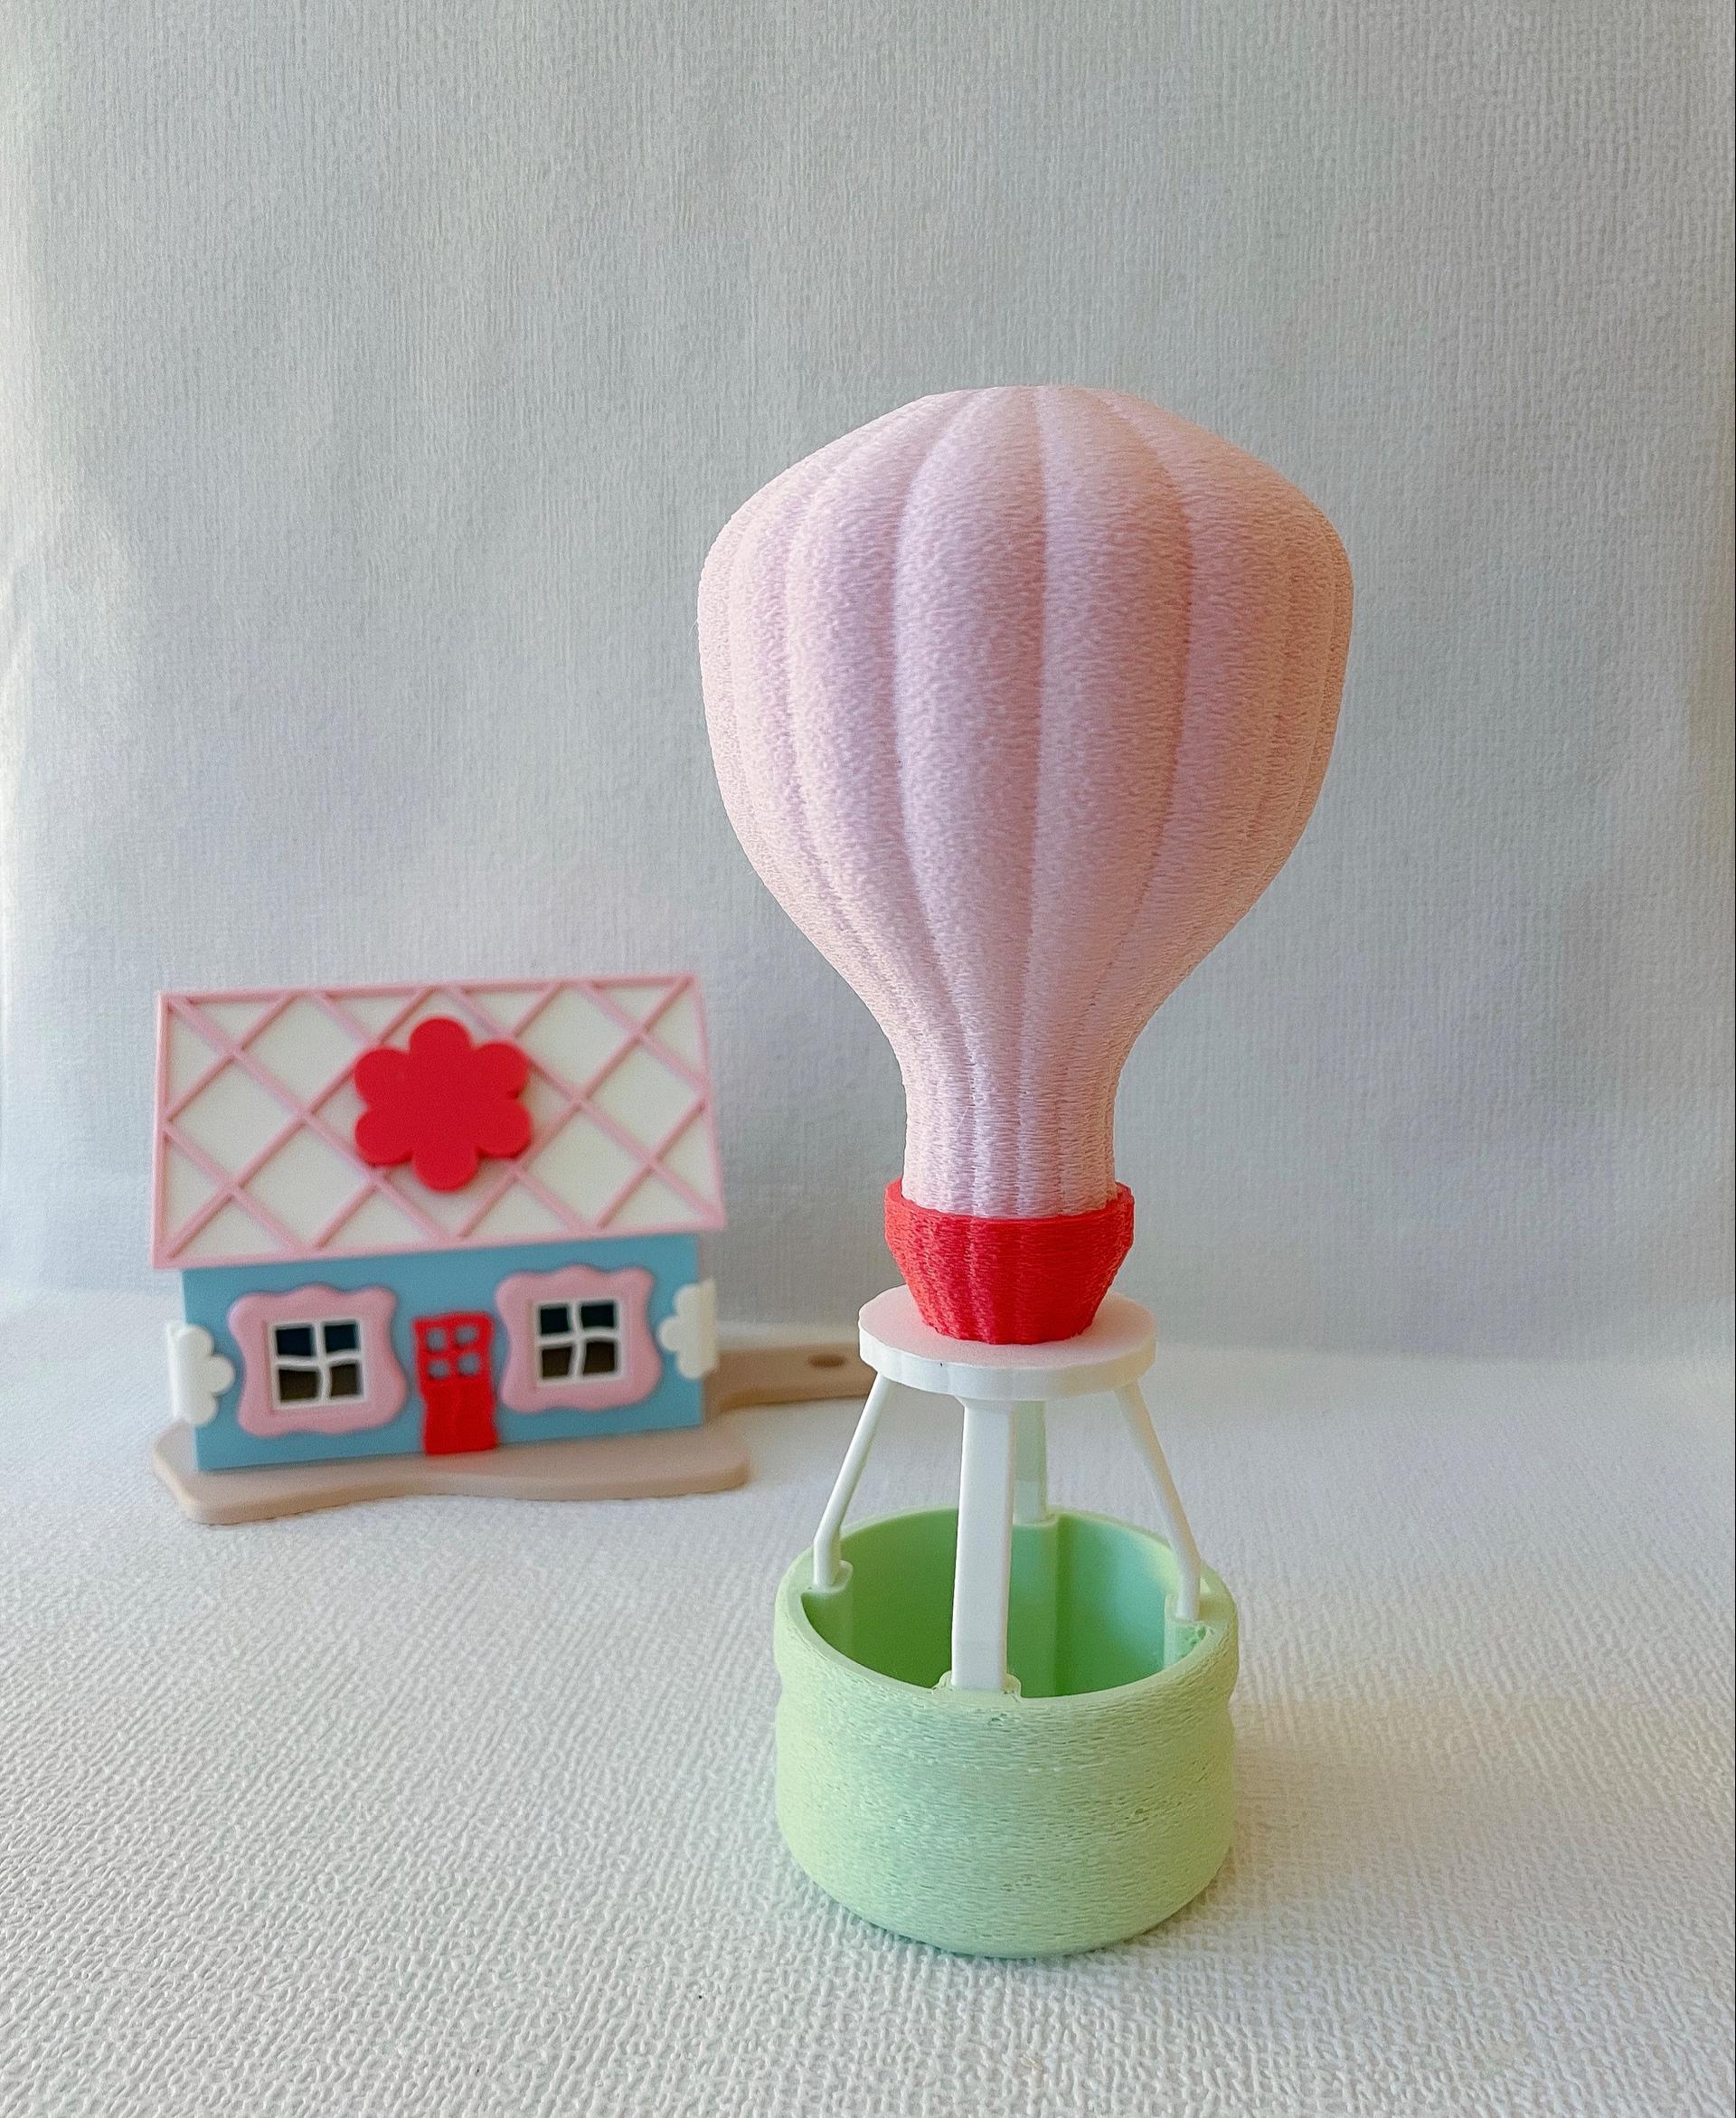 Hot air balloon 2.1 - let's fly to the sky with this cute hot air balloon!
Polymaker filament. - 3d model